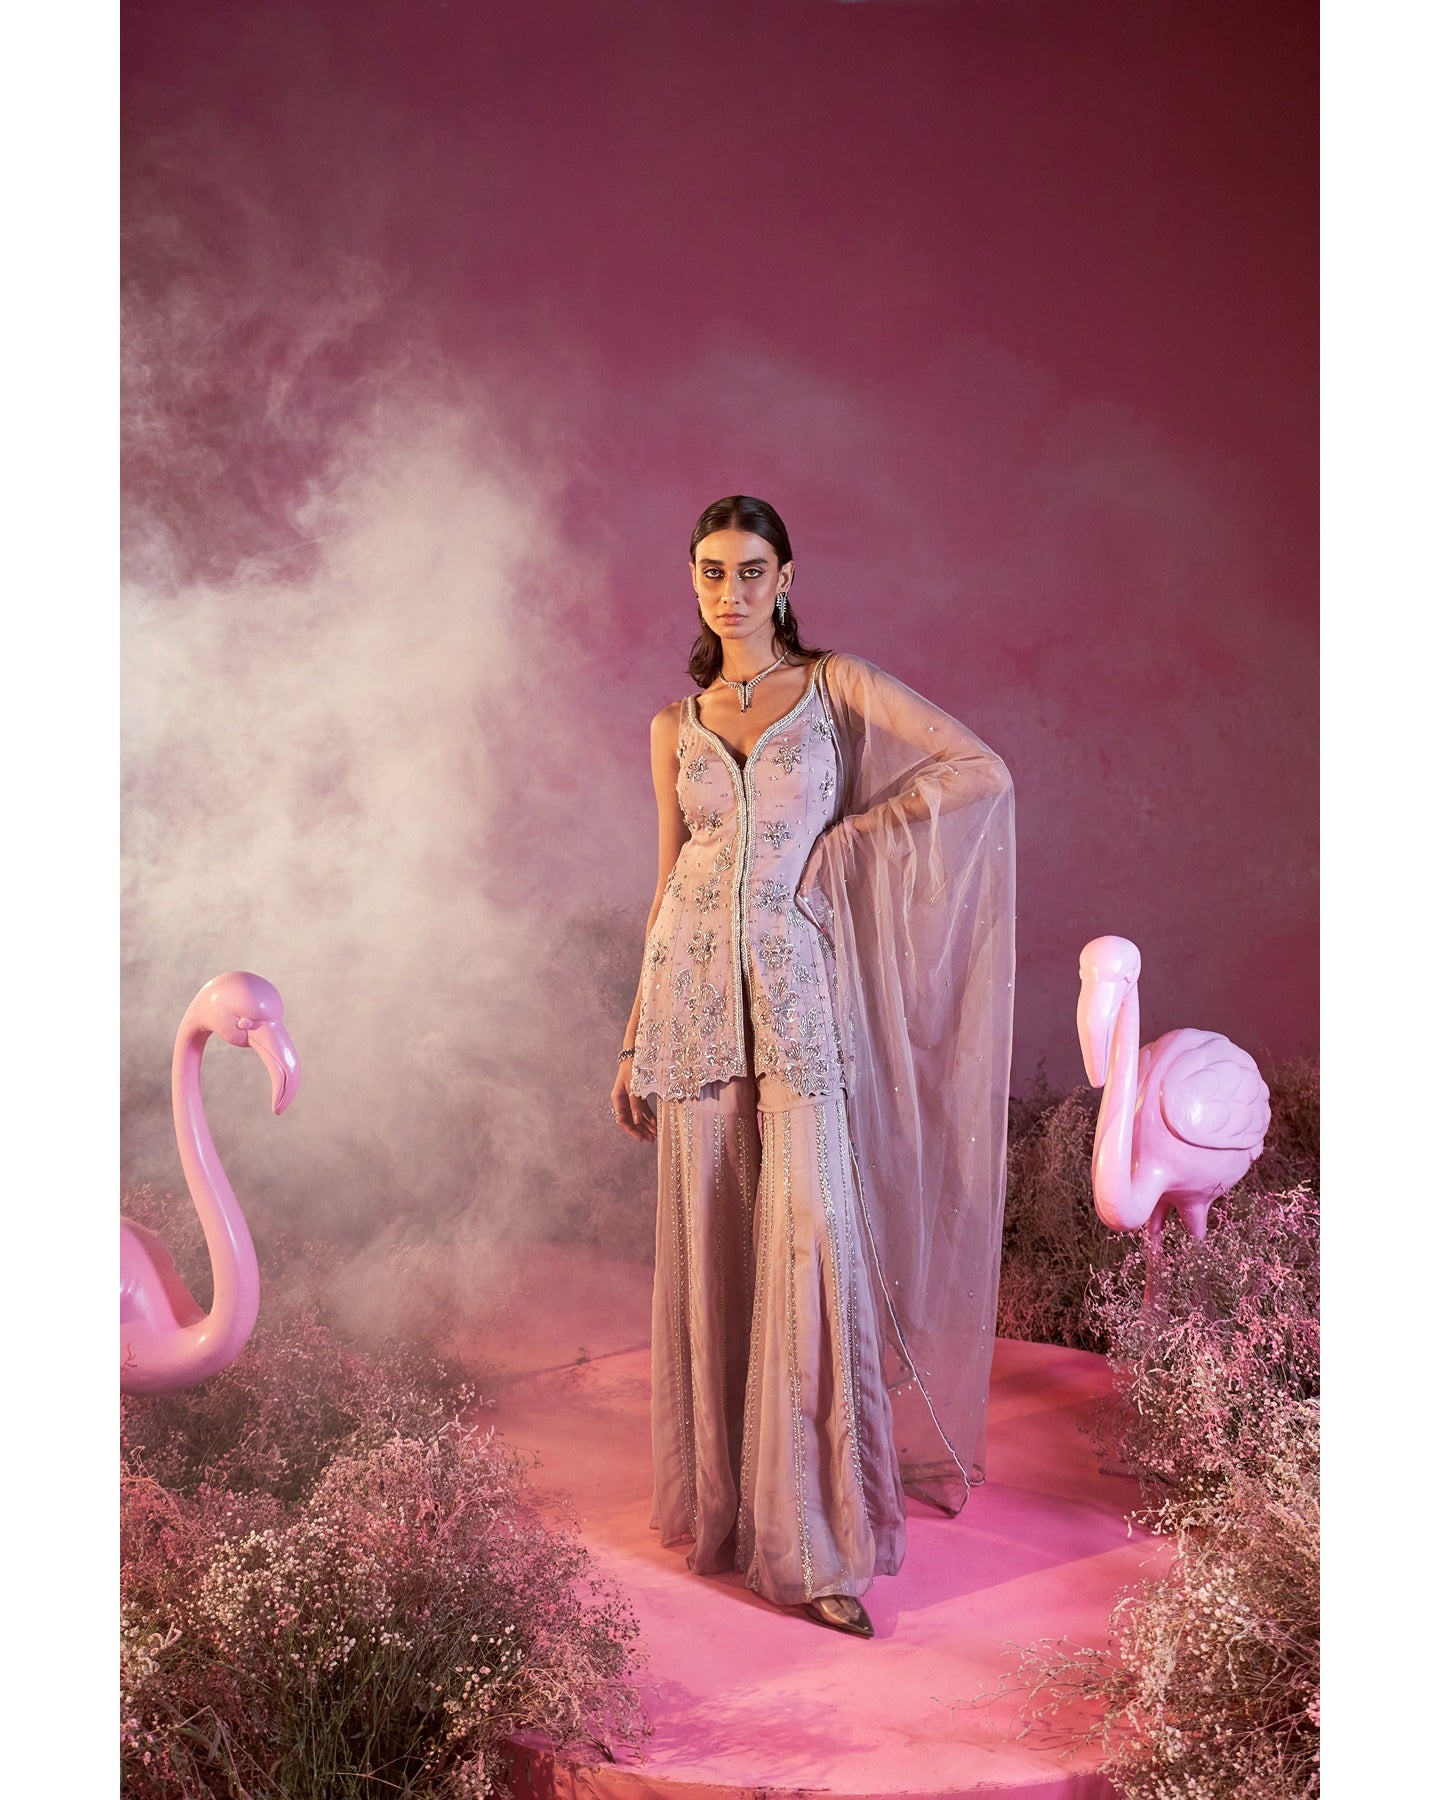 Lilac dreams come to life: Embracing the beauty of hand-embroidery in this soft and enchanting sharara set.